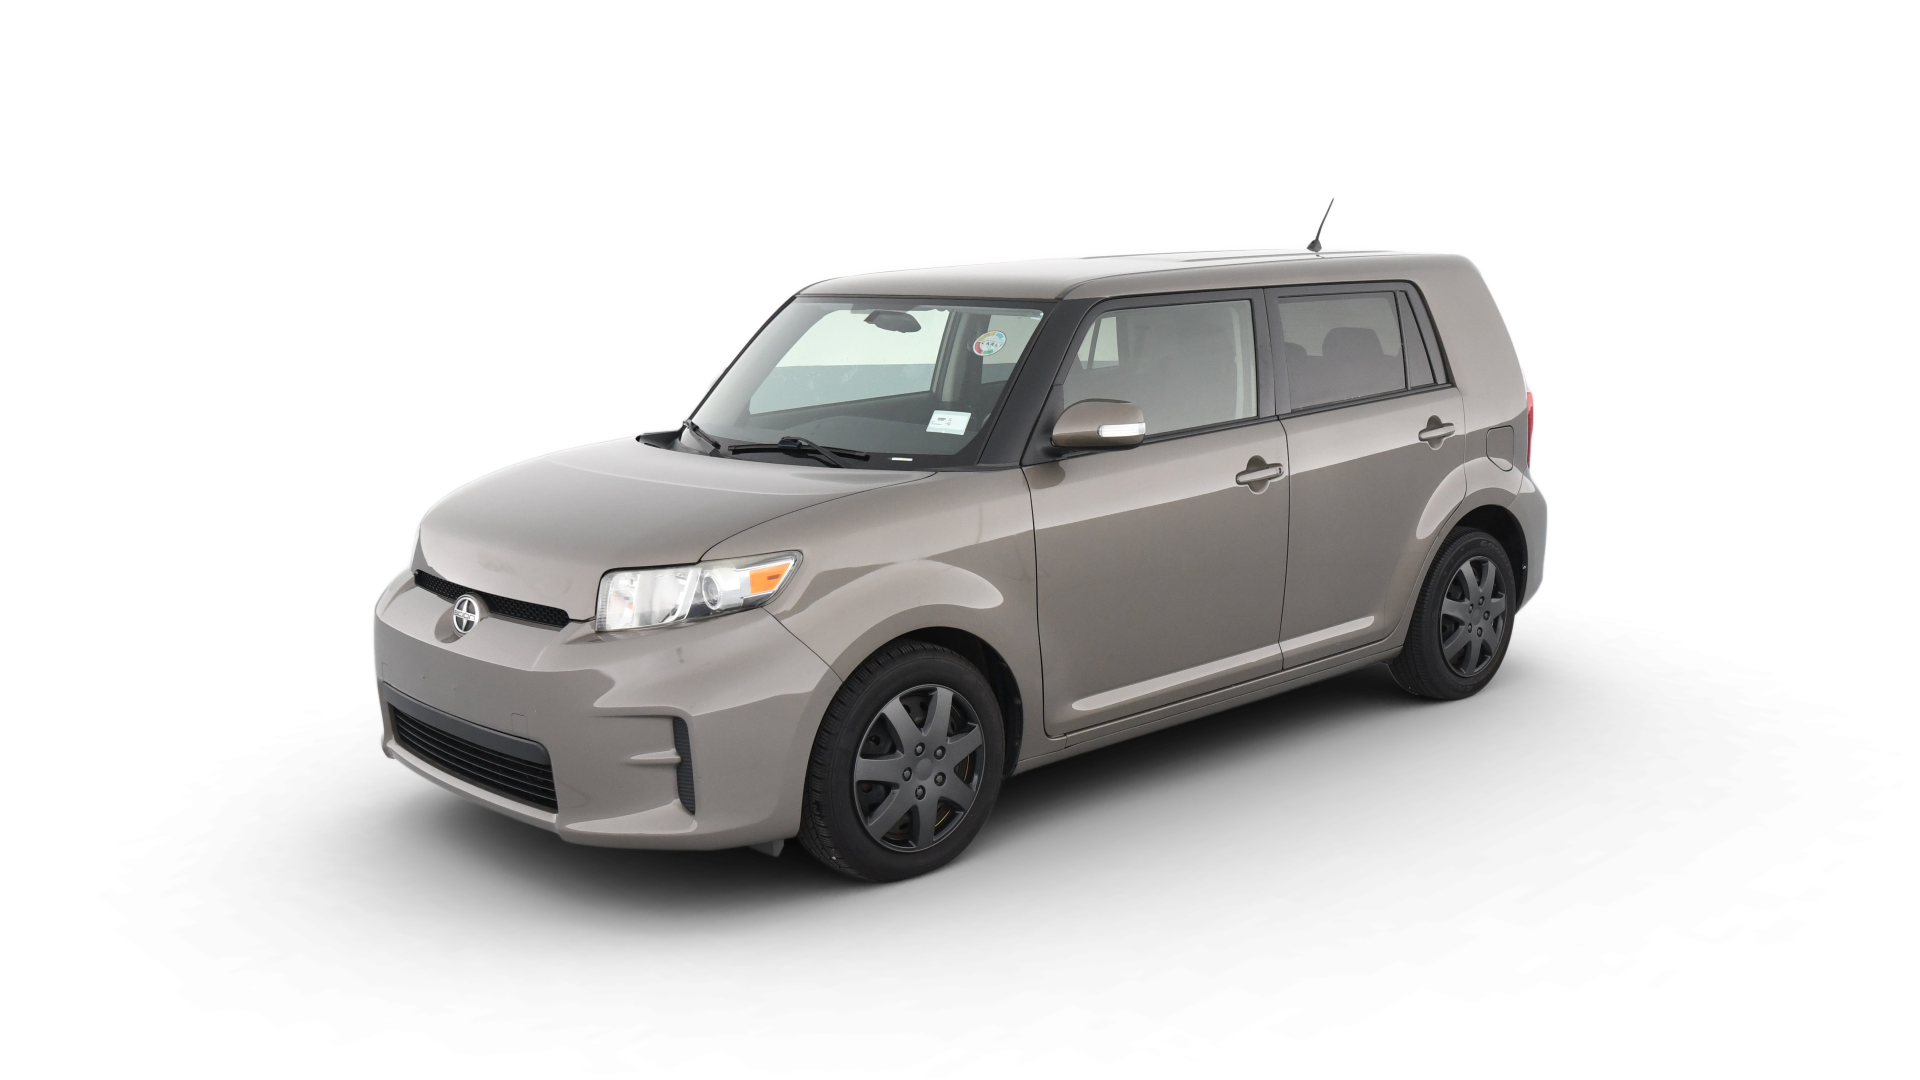 Used Scion xB For Sale Online | Carvana